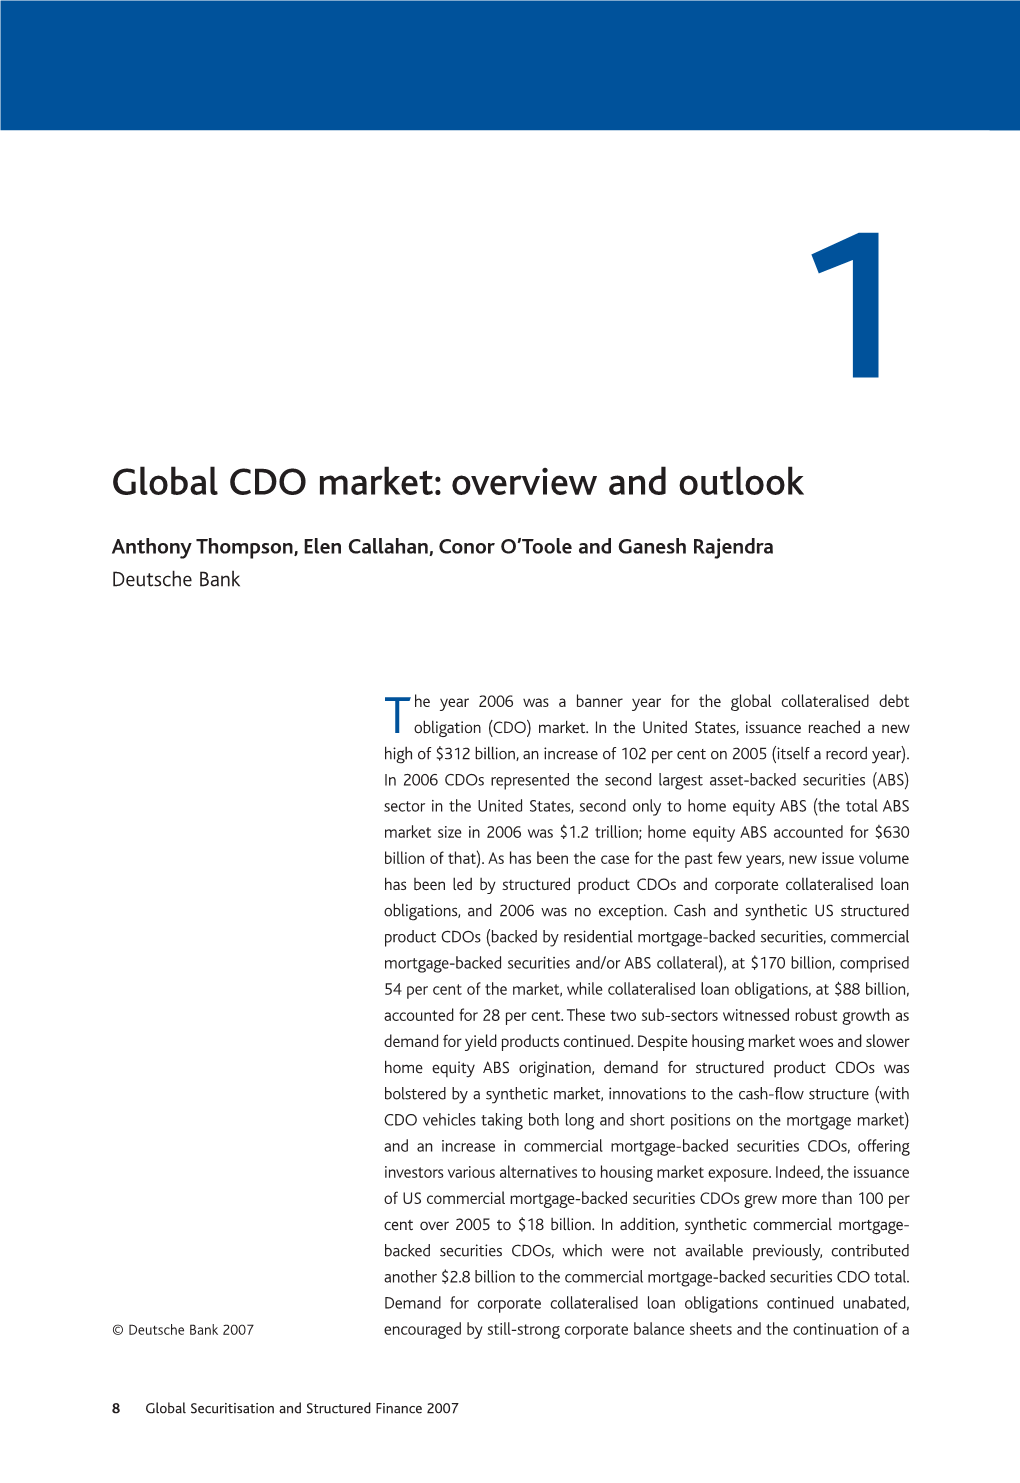 Global CDO Market: Overview and Outlook